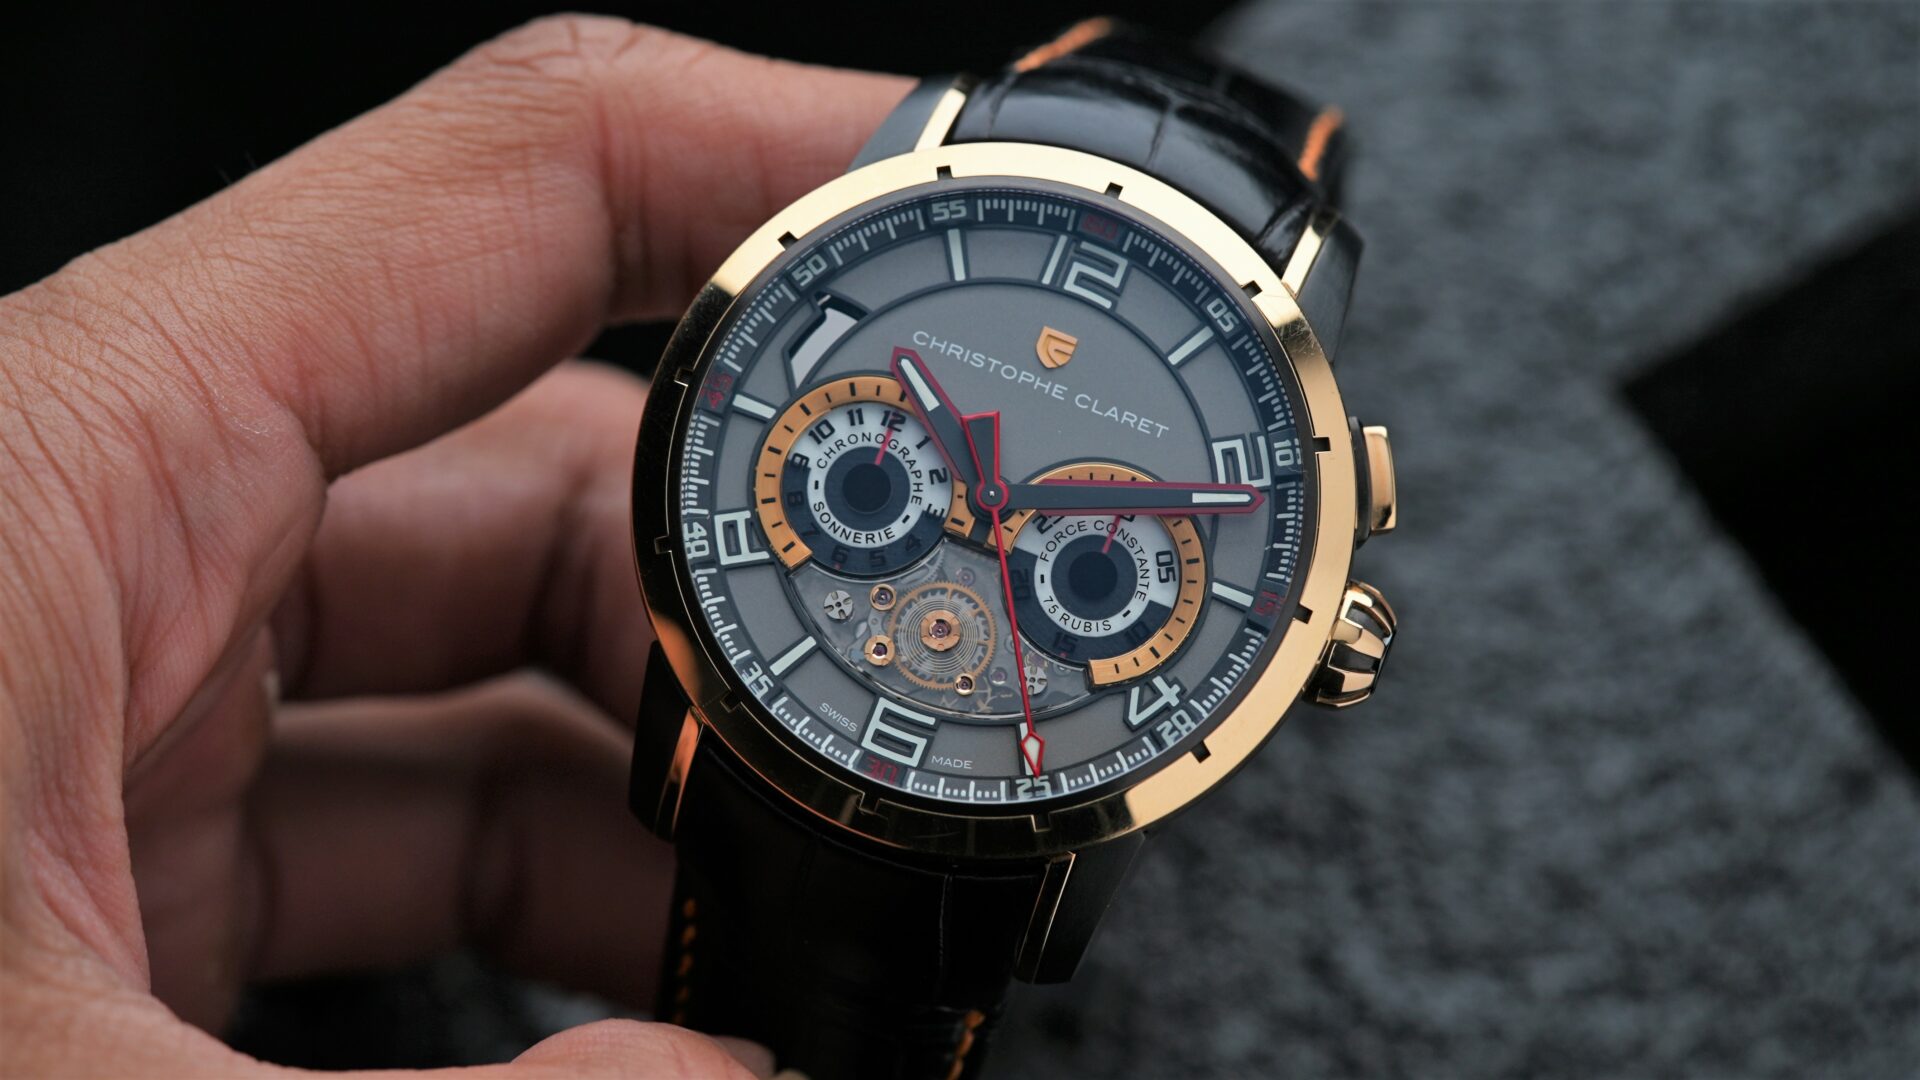 Christophe Claret Kantharos Chime Sonnerie Monopusher Chronograph being held in hand.